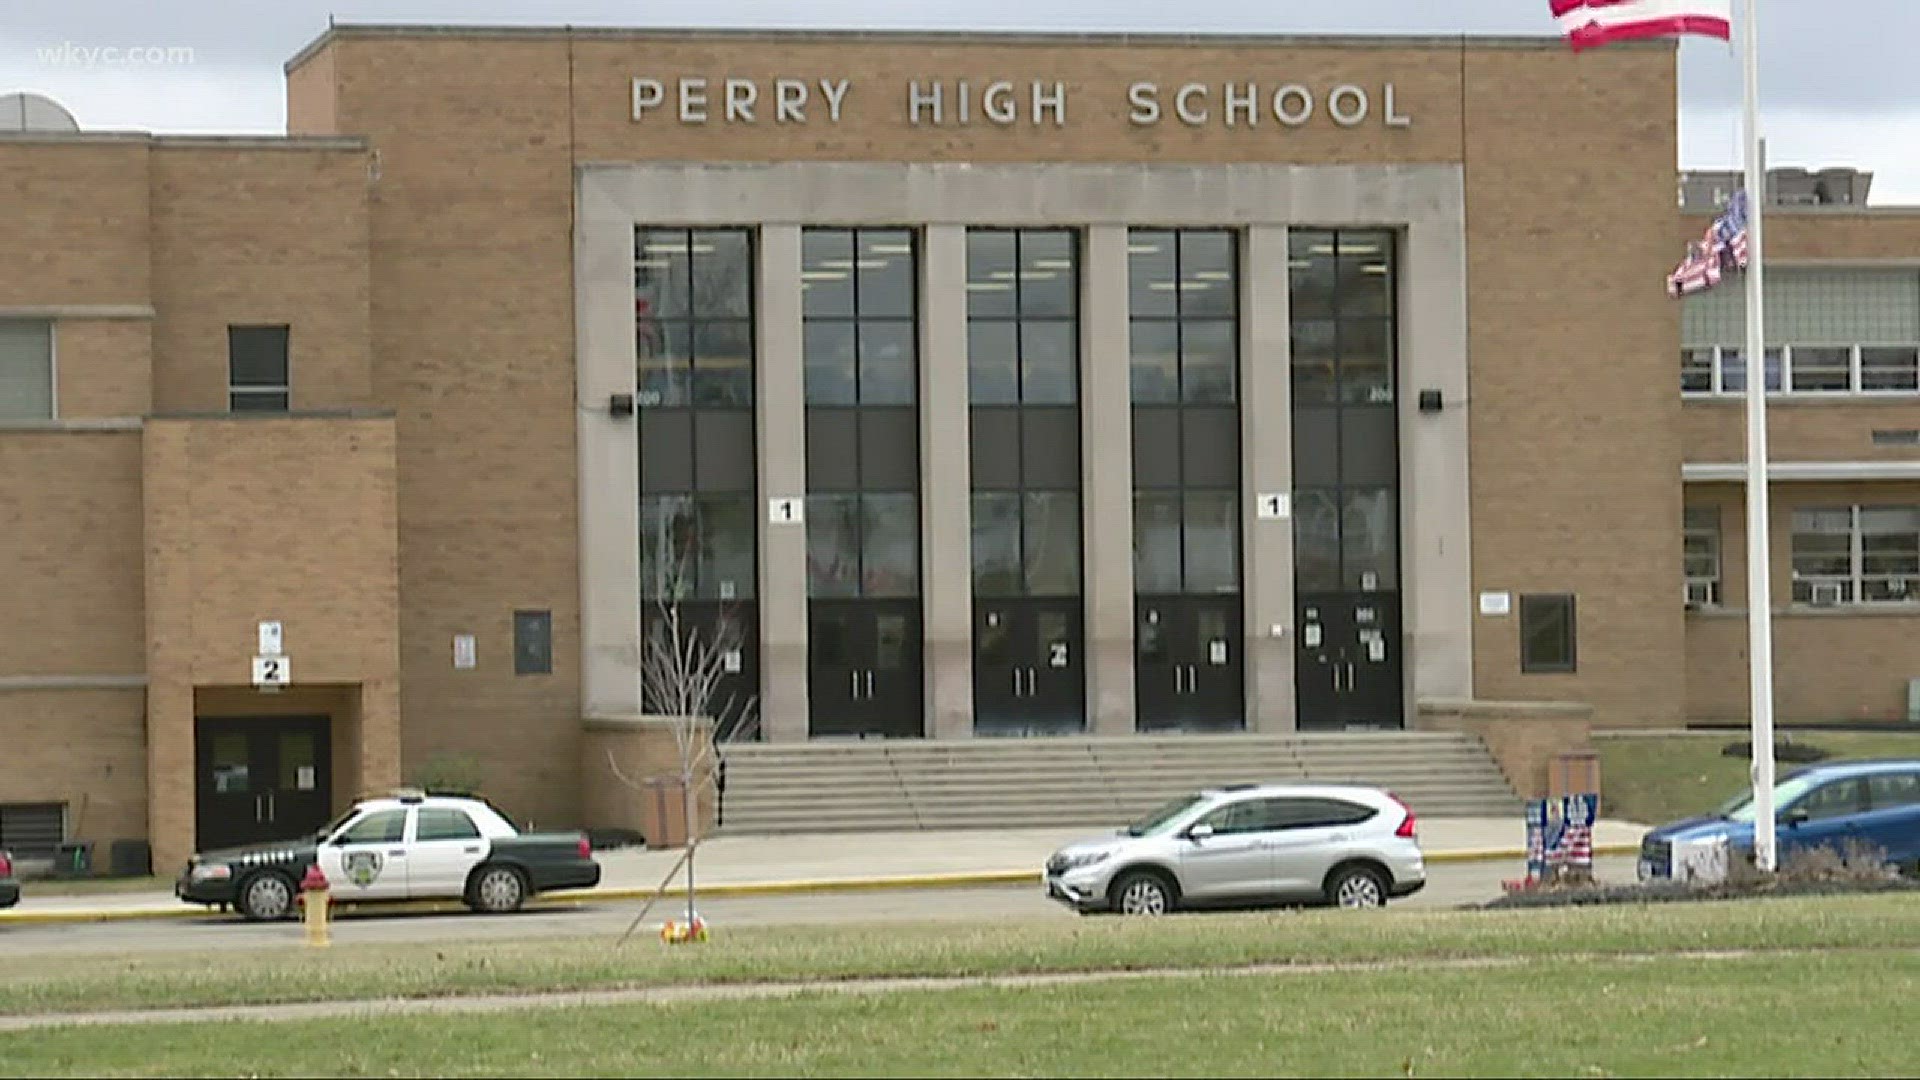 Student arrested for spreading false rumors on candy at Perry High School